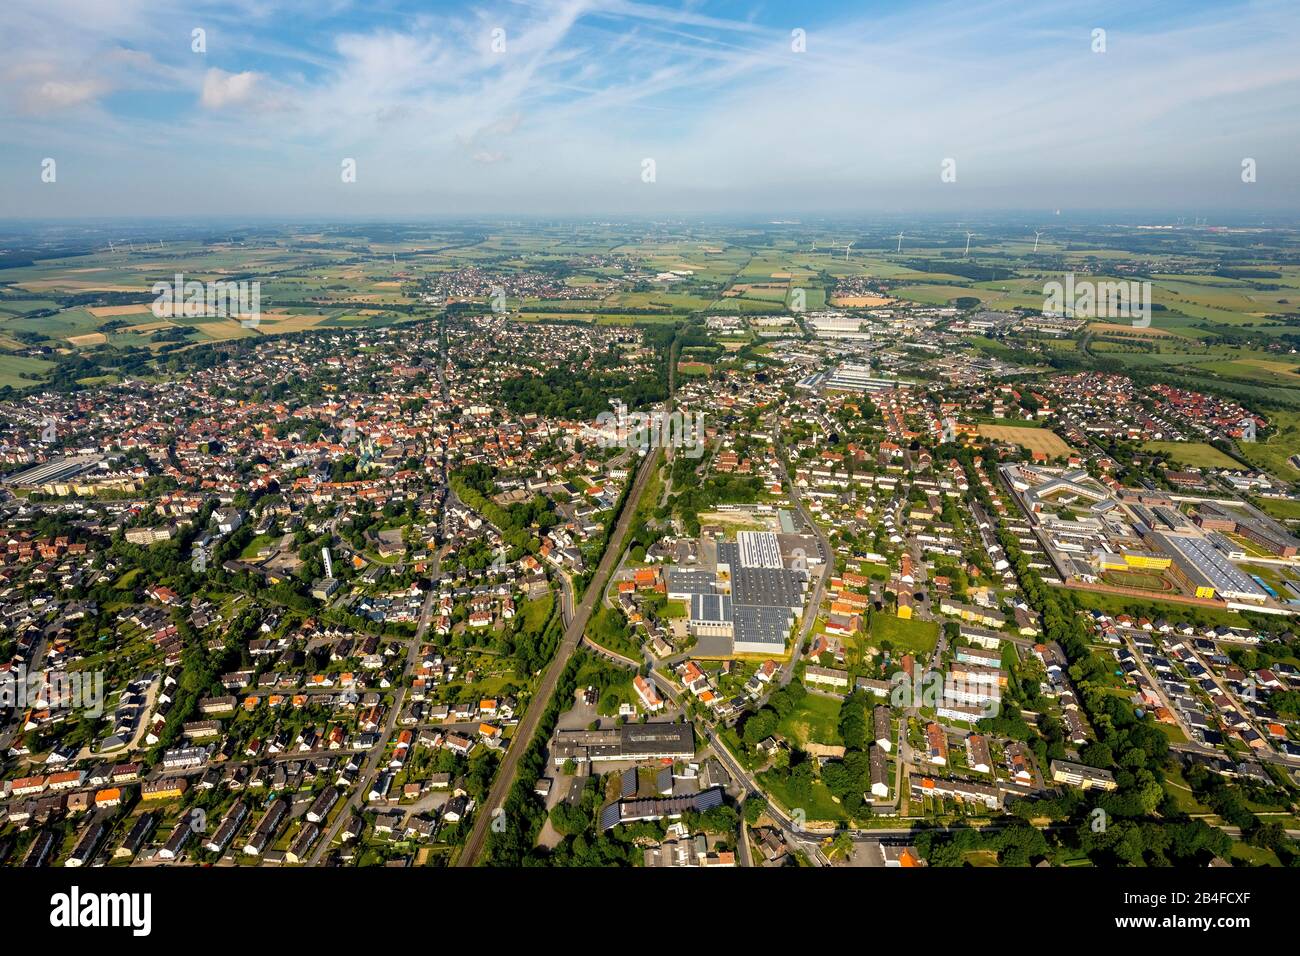 Aerial view of the commercial area Werl-Nordwest with metal processing plant Standard-Metallwerke GmbH in Werl, Soester Börde, North Rhine-Westphalia, Germany, Werl, Stock Photo